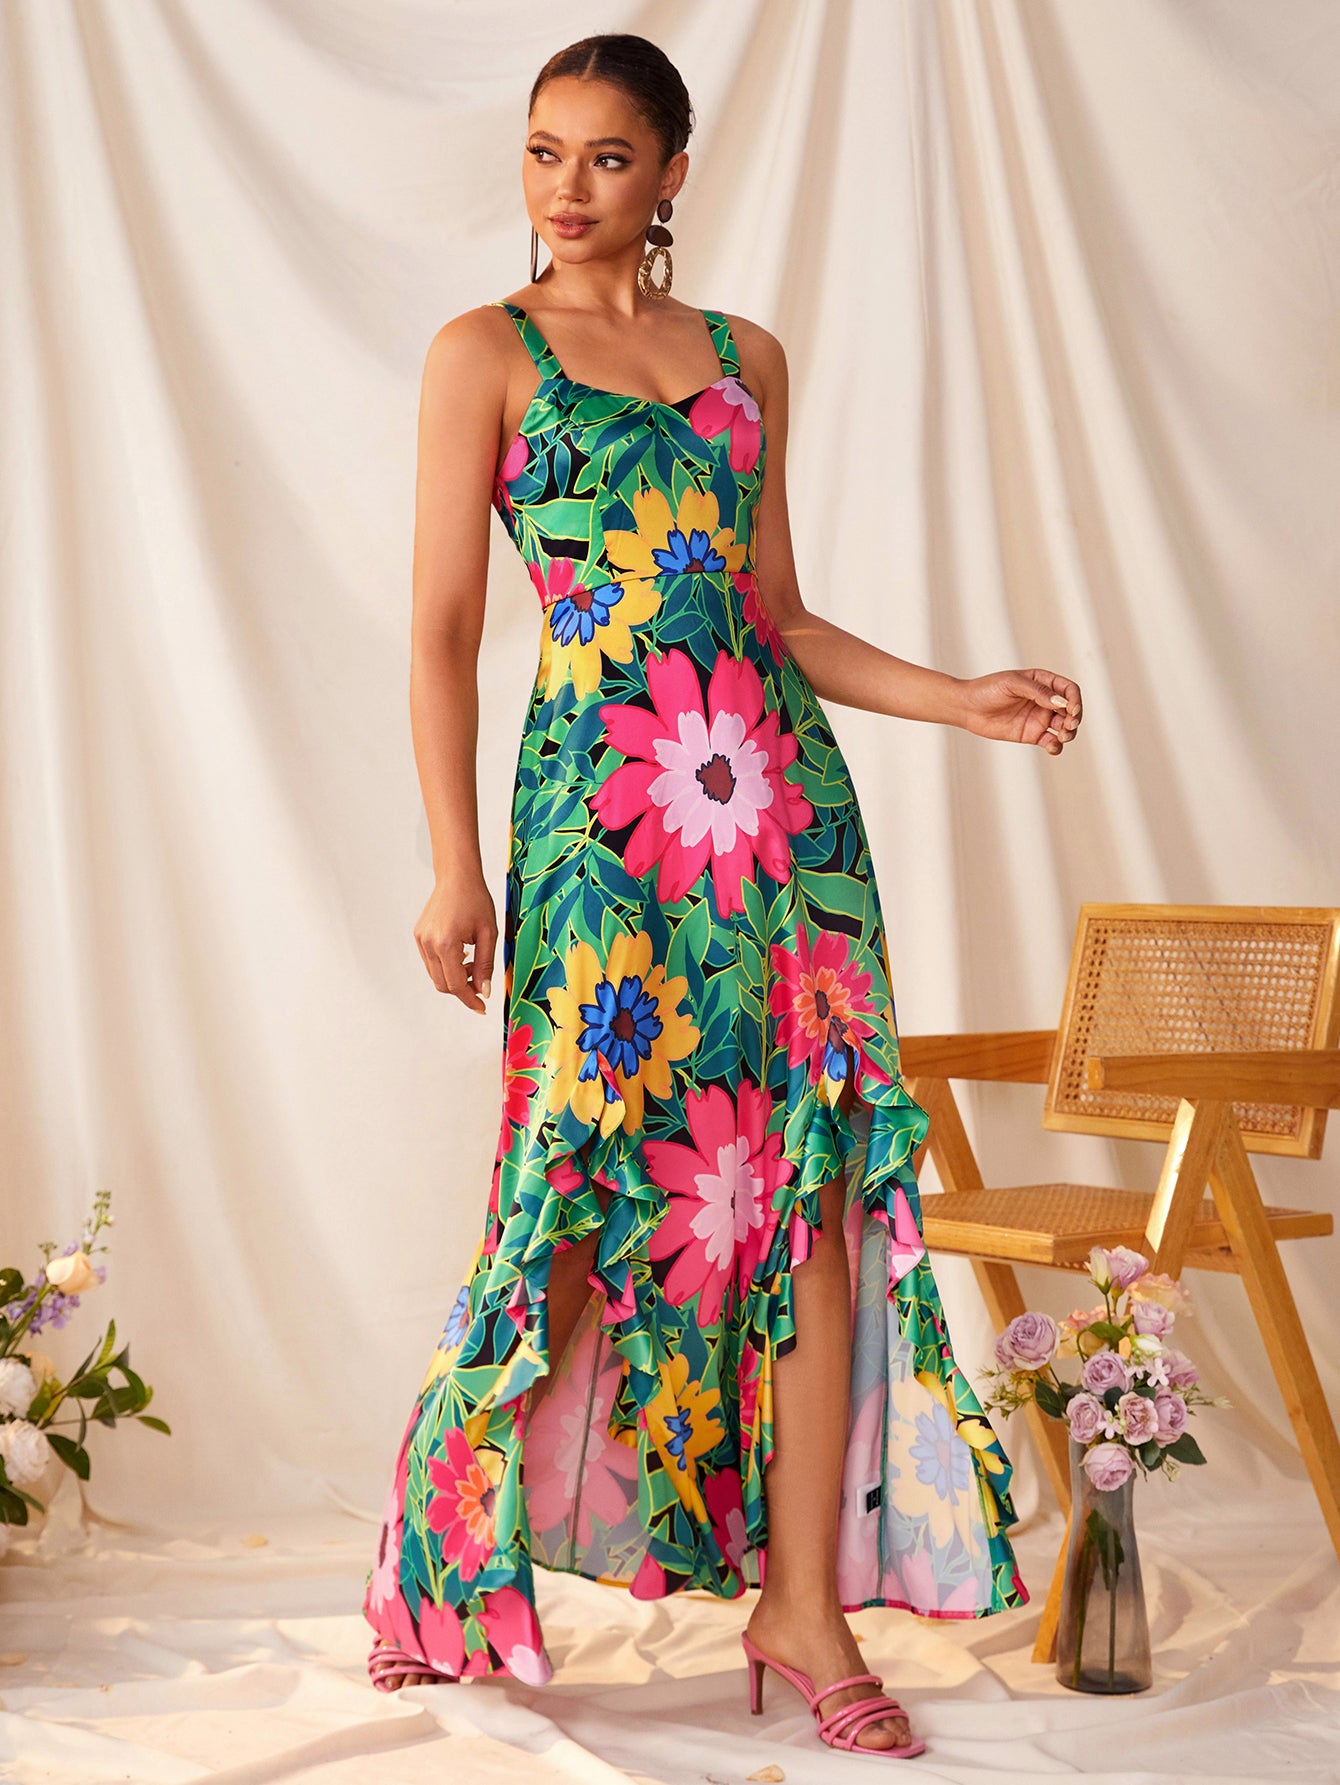 BELANGE HANDMADE x SHEIN - Double Front Split Cami Maxi Dress - Available on SHEIN.COM Only